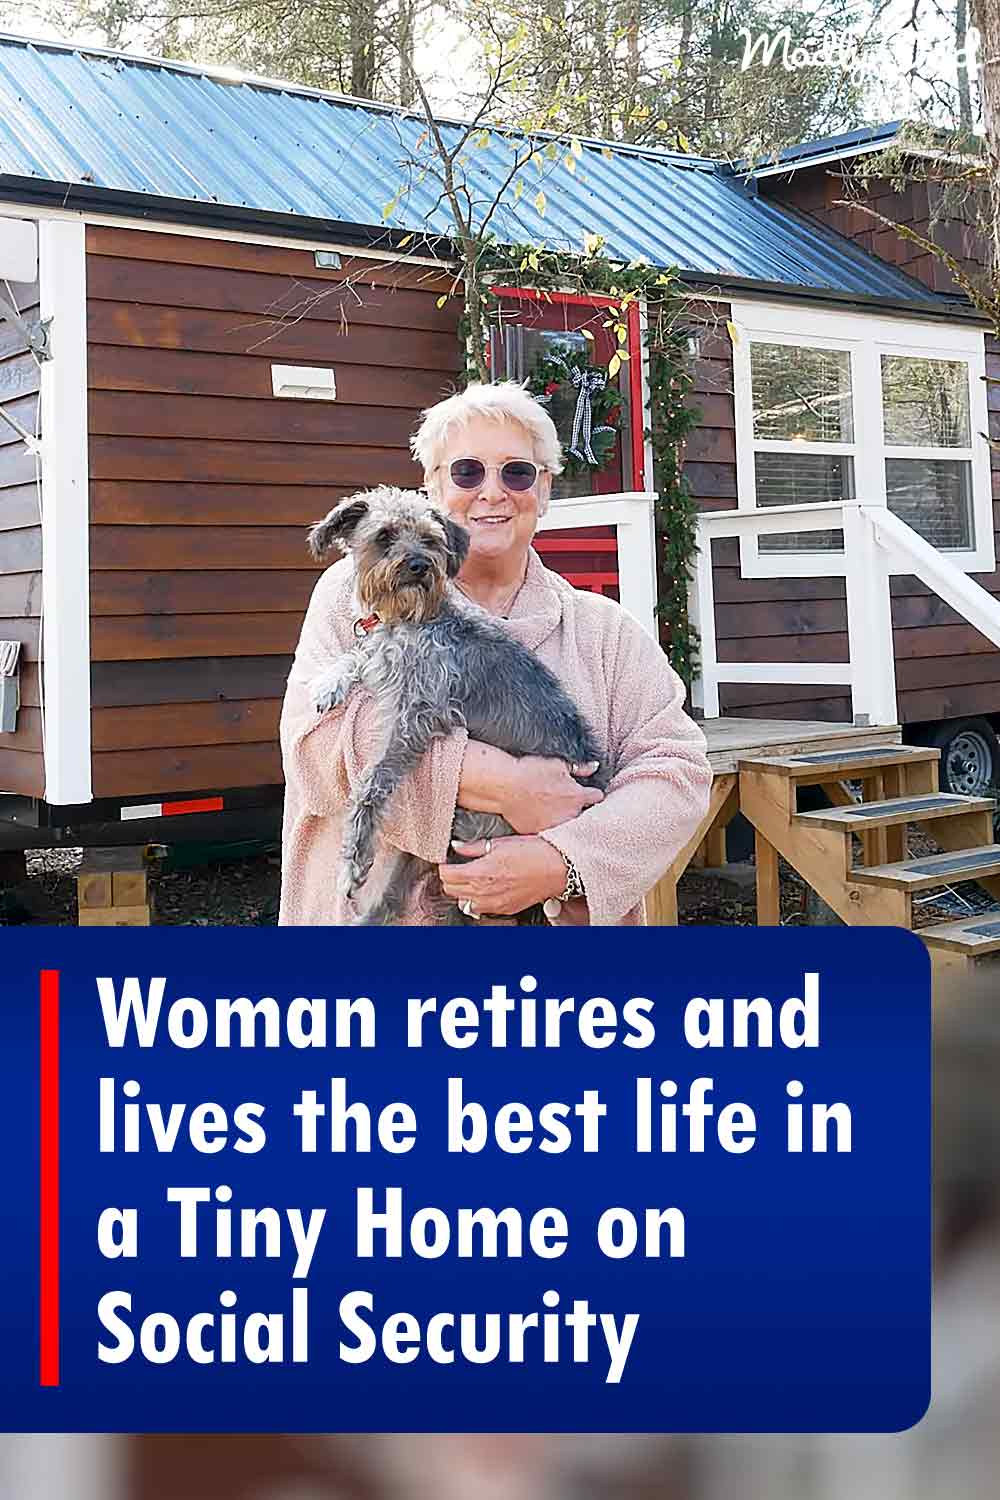 Woman retires and lives the best life in a Tiny Home on Social Security